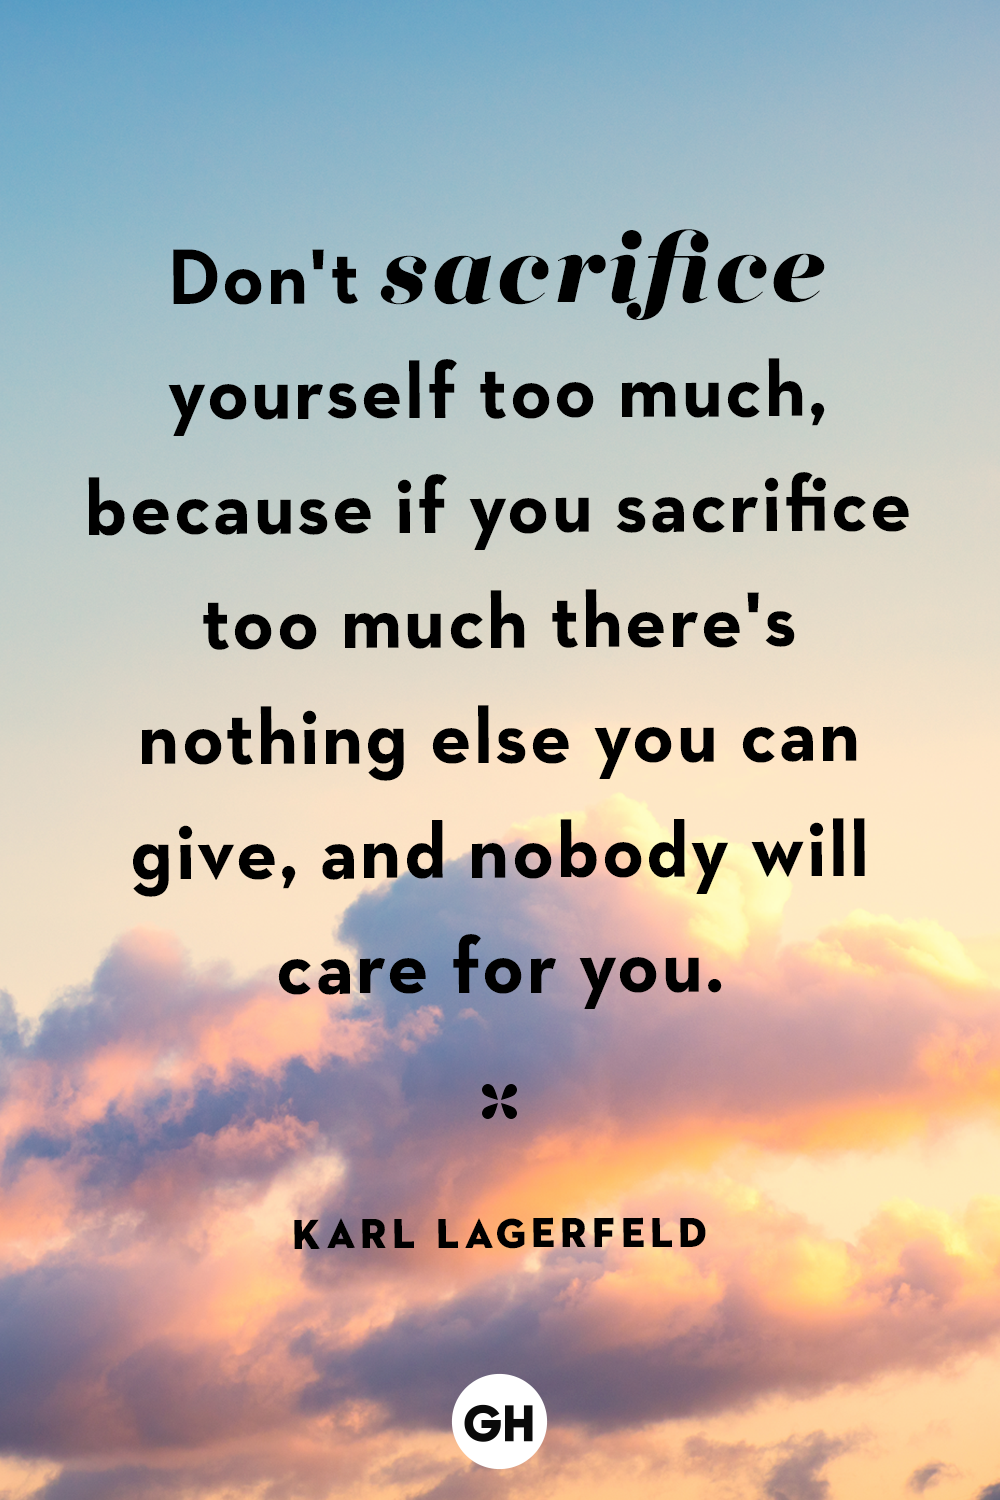 gh-self-care-quotes-karl-lagerfeld-1580254602.png